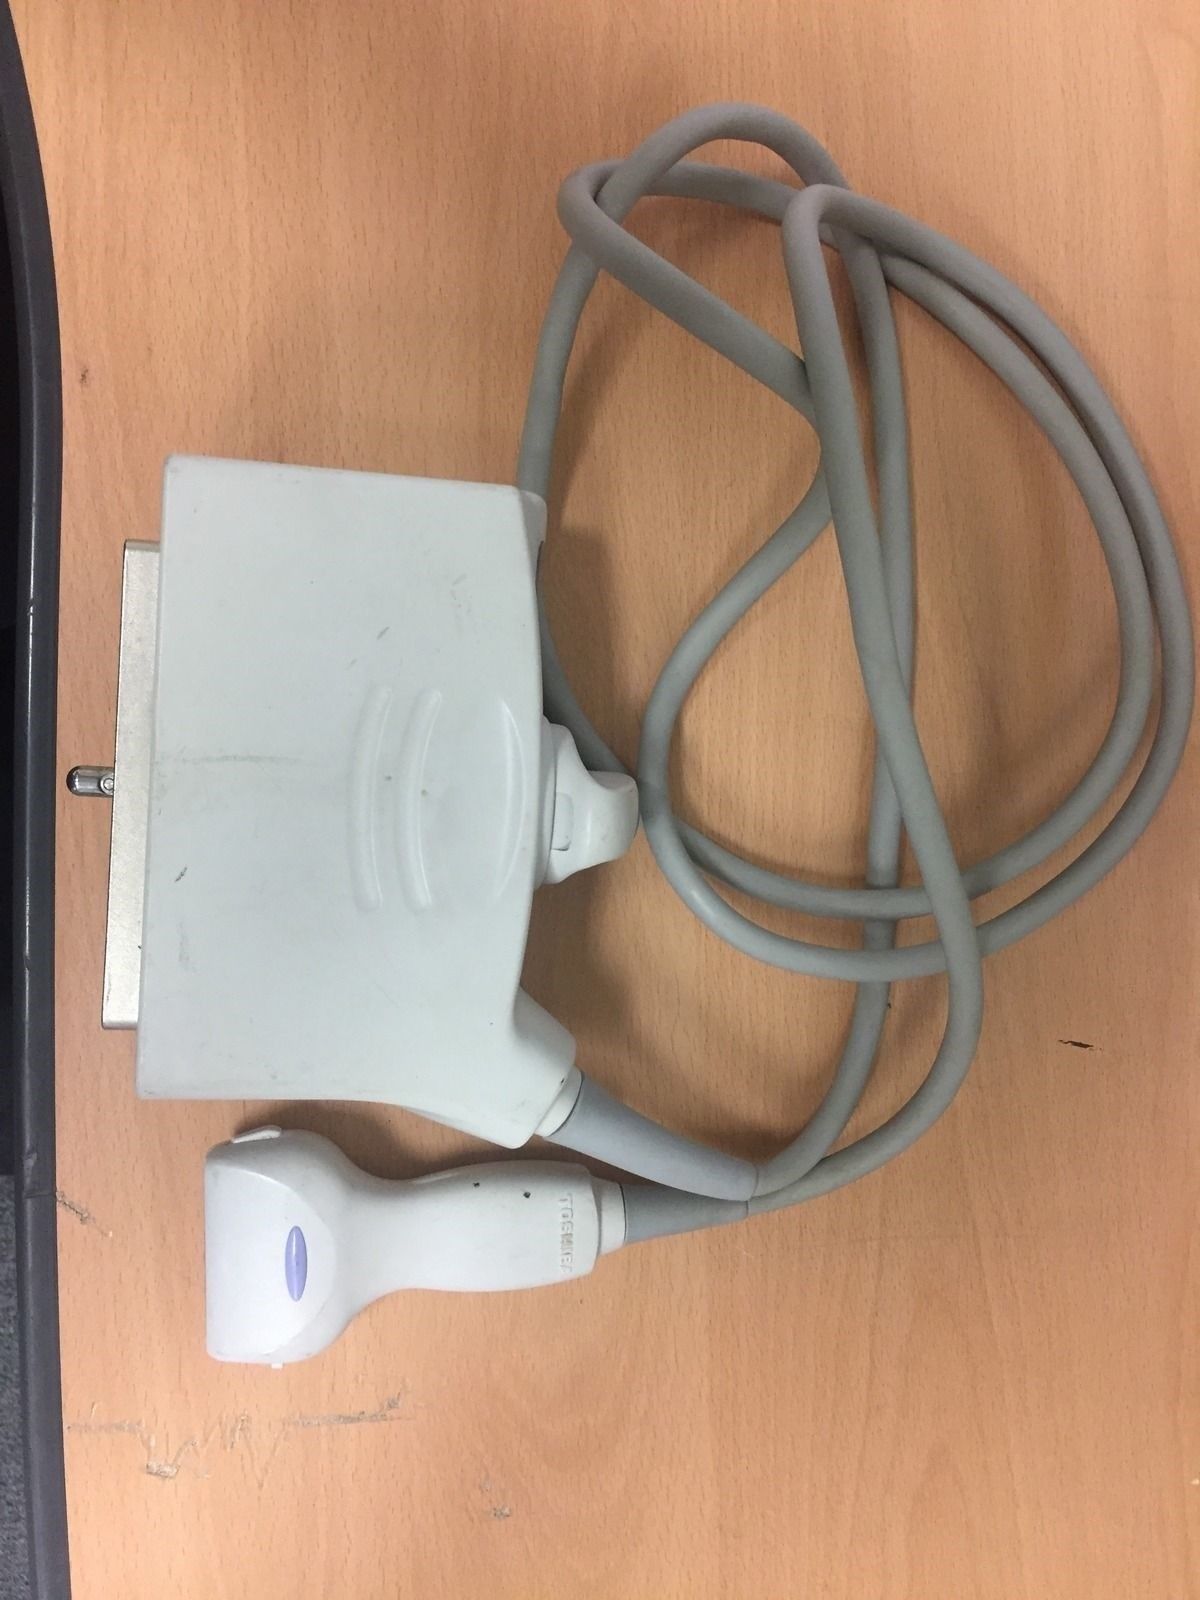 Toshiba Aplio PLT-1204AT 12MHz Linear Transducer Probe for Small Parts DIAGNOSTIC ULTRASOUND MACHINES FOR SALE